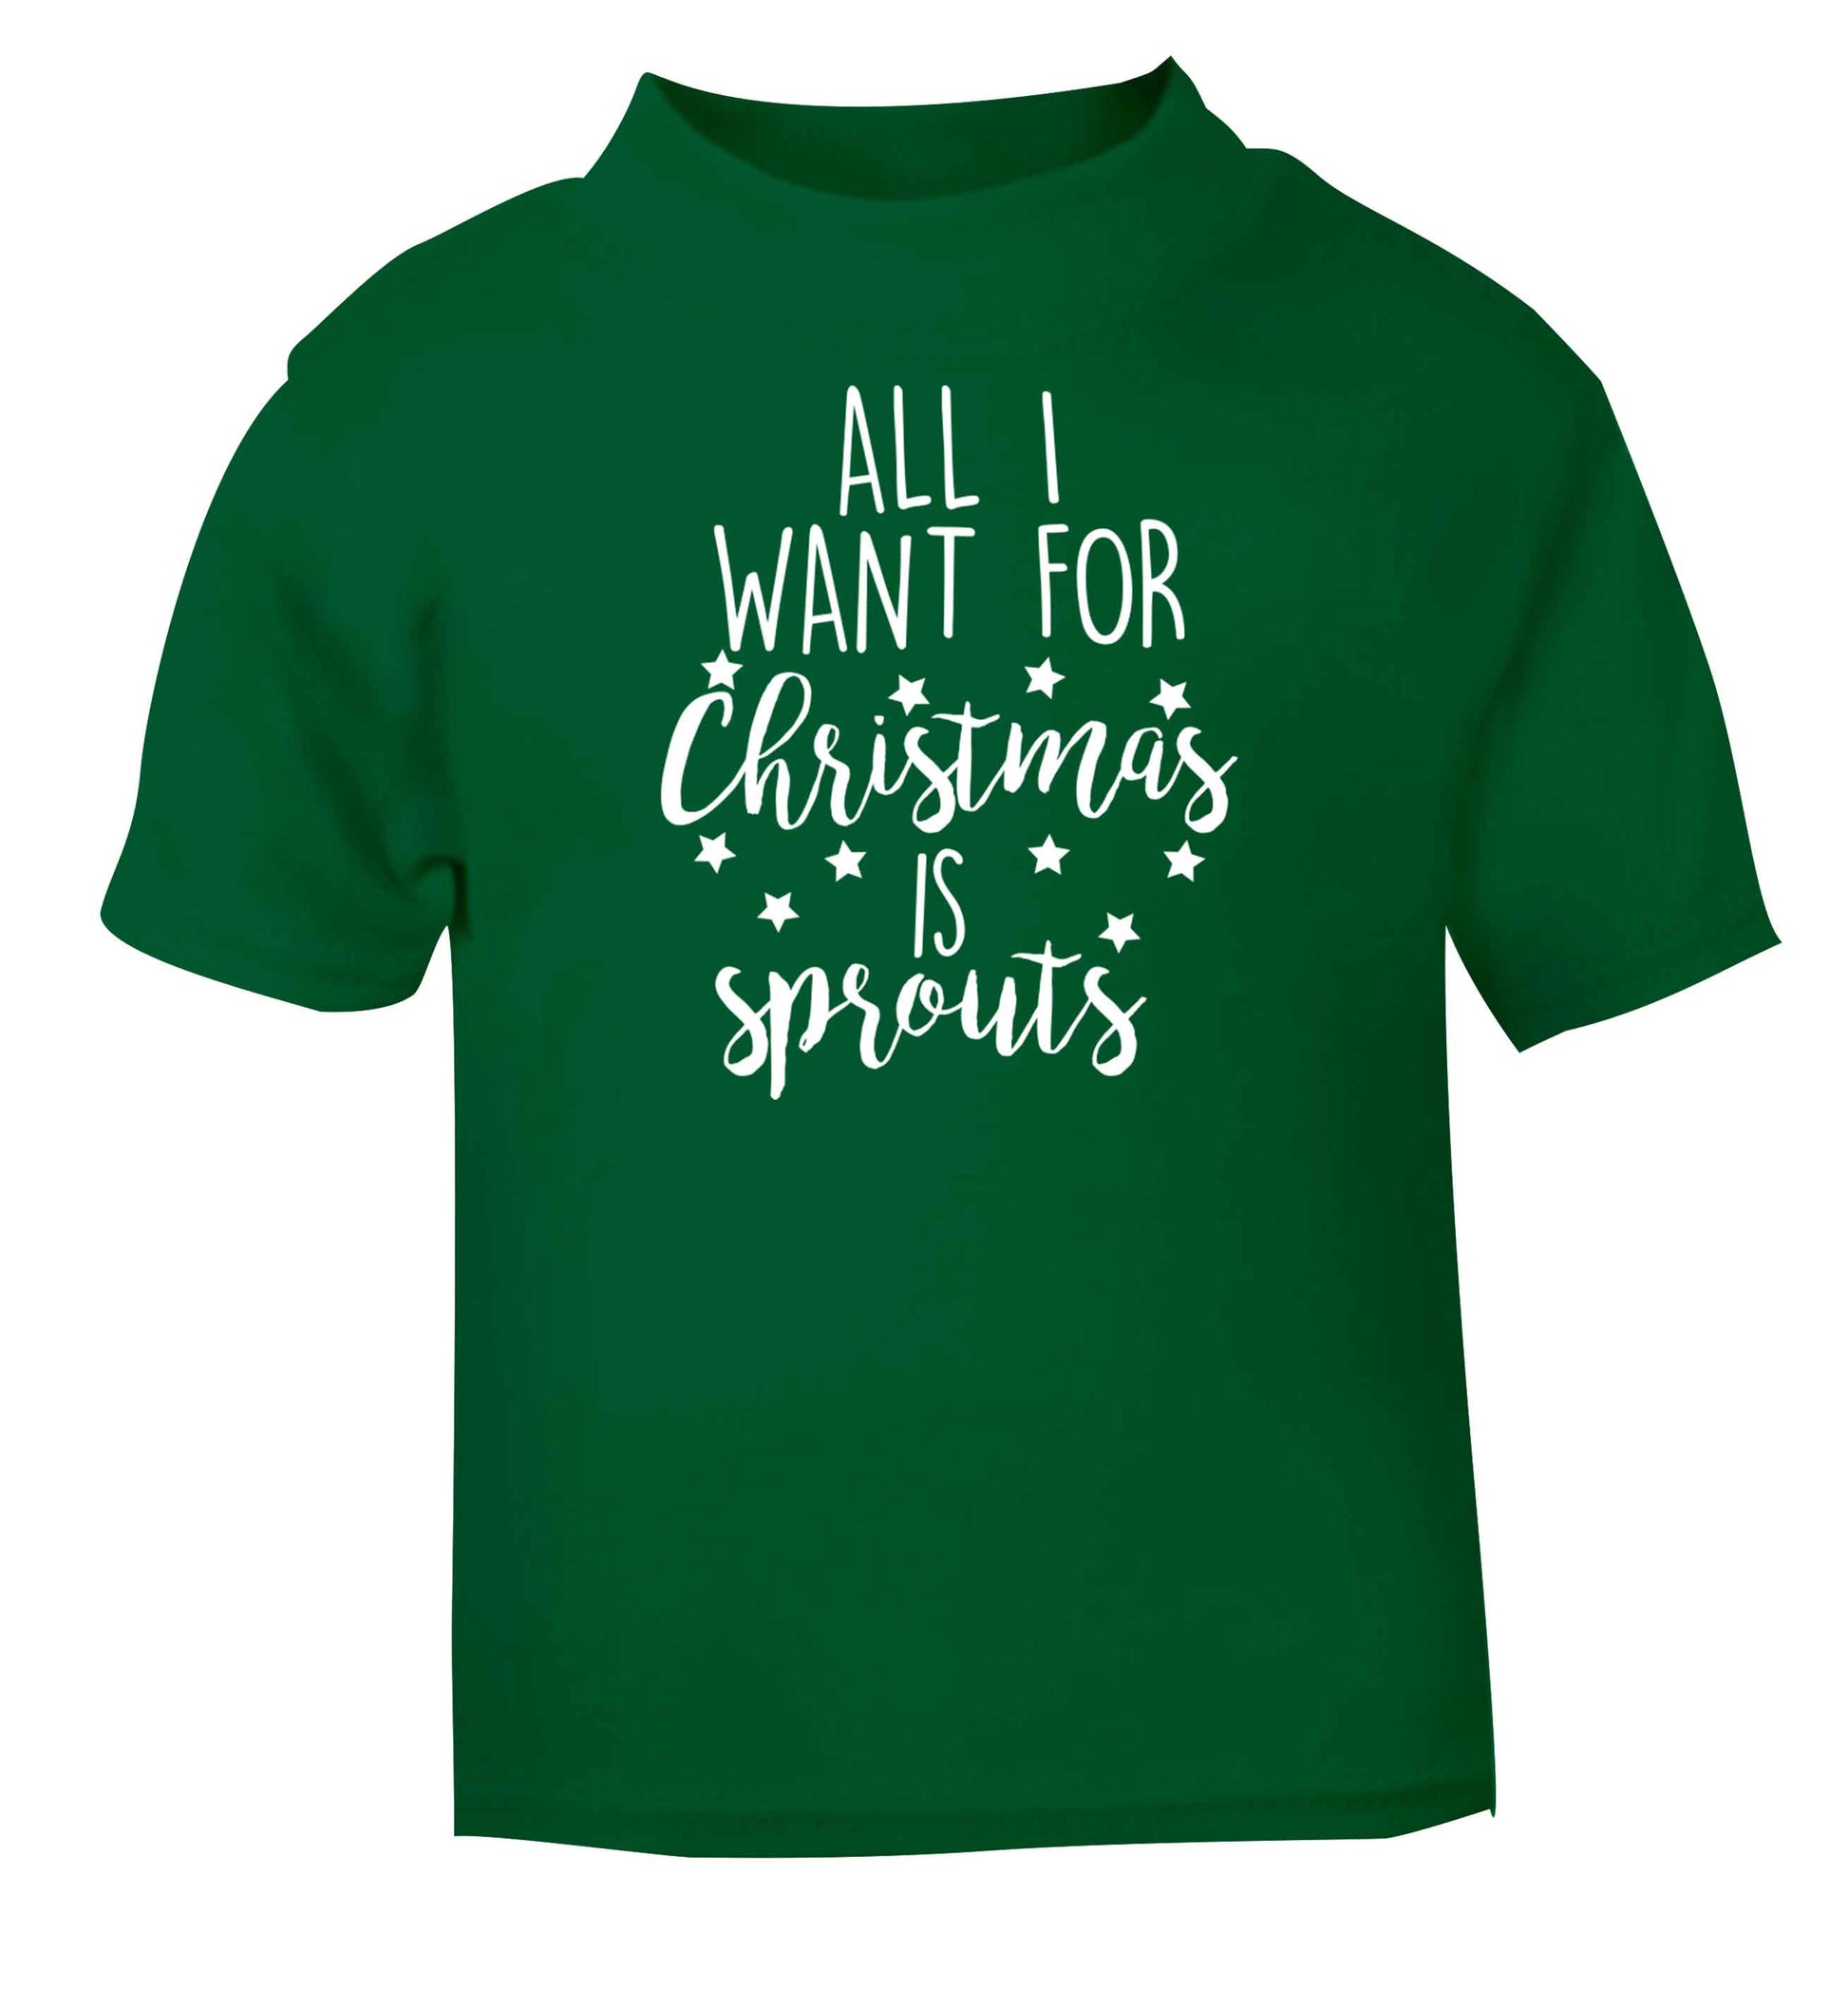 All I want for Christmas is sprouts green baby toddler Tshirt 2 Years